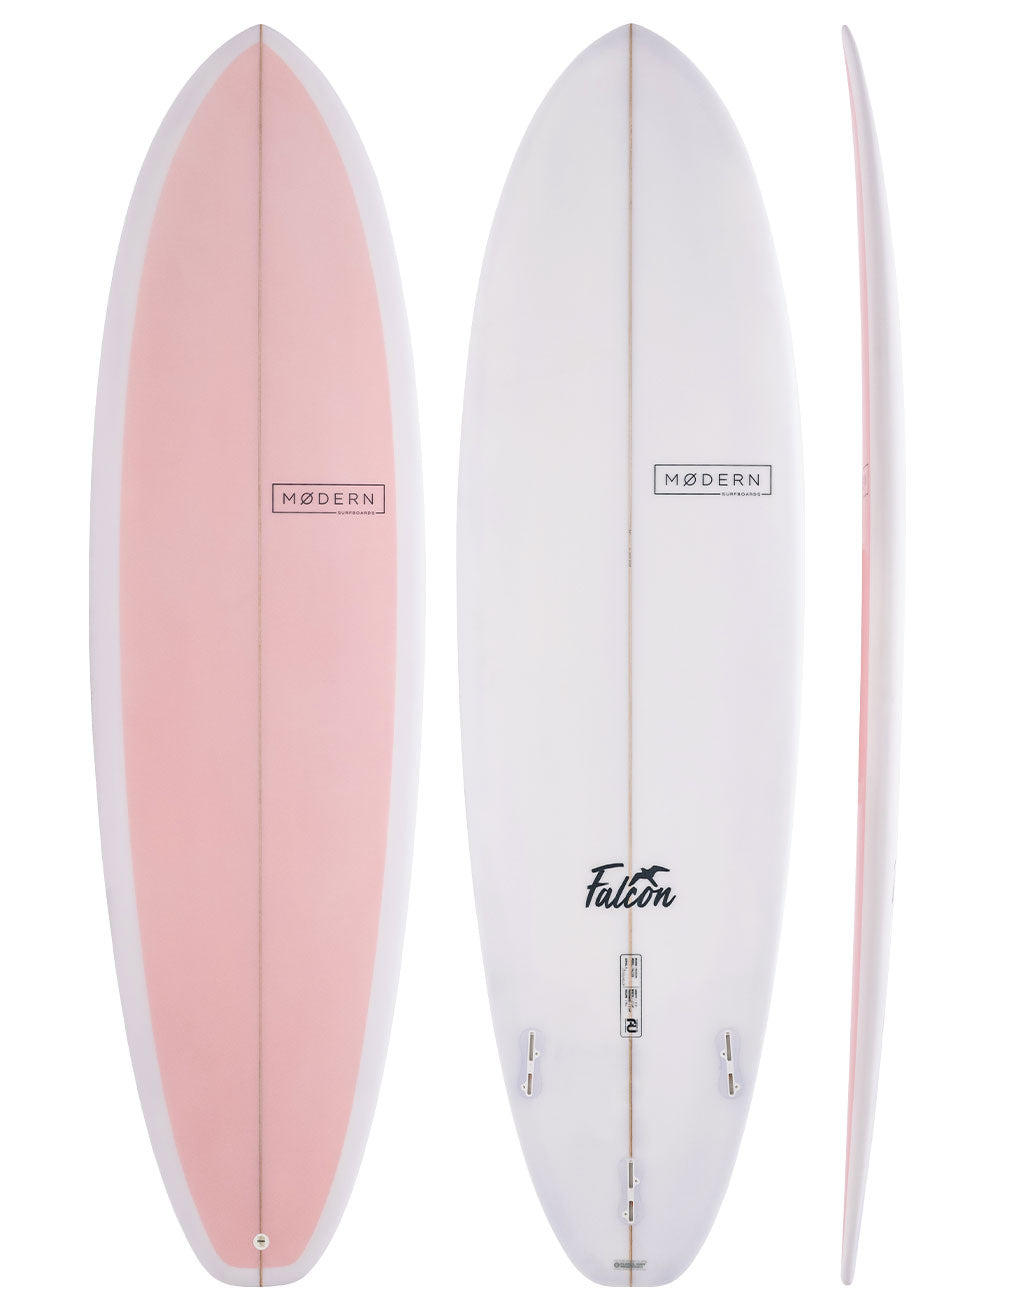 Modern Falcon mid length candy pink  surfboard